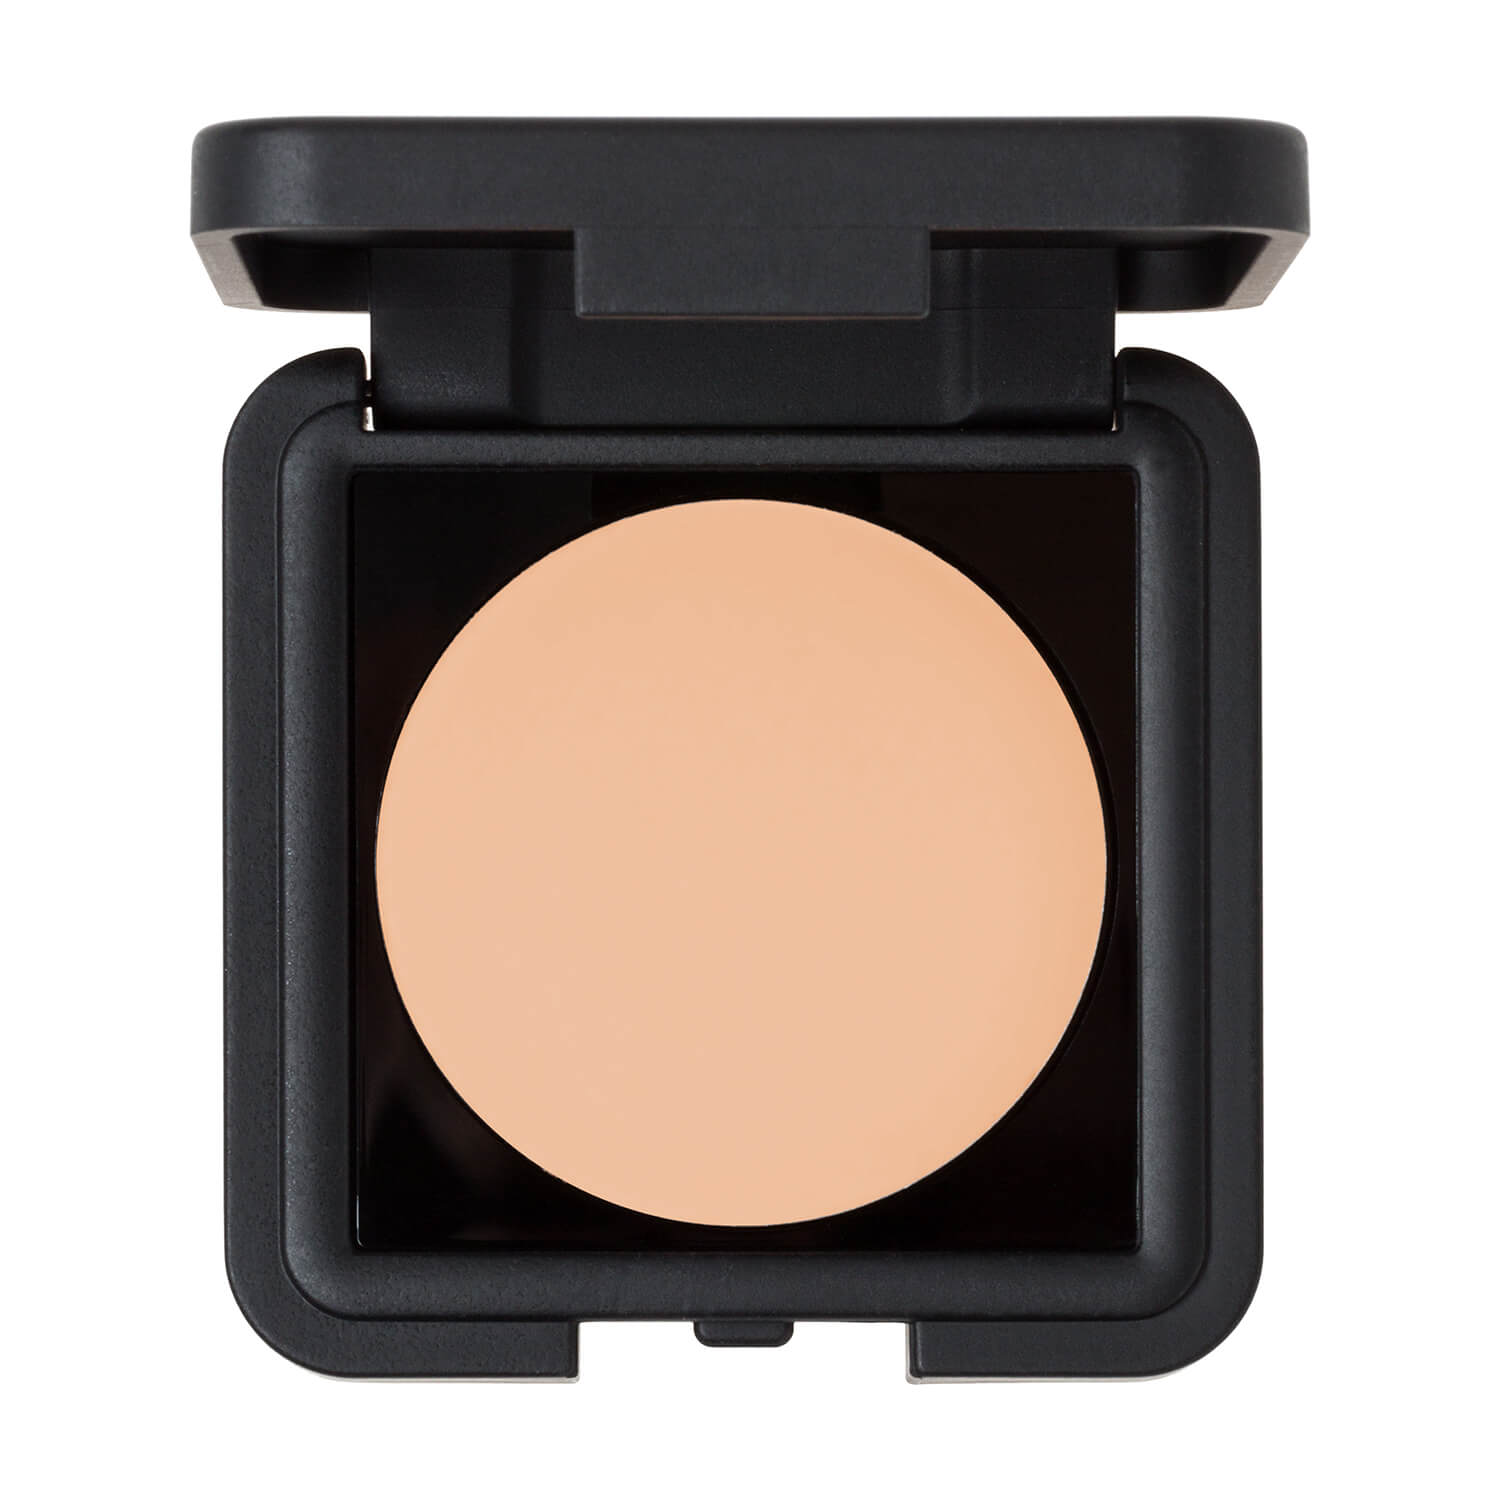 the full concealer (corrector)